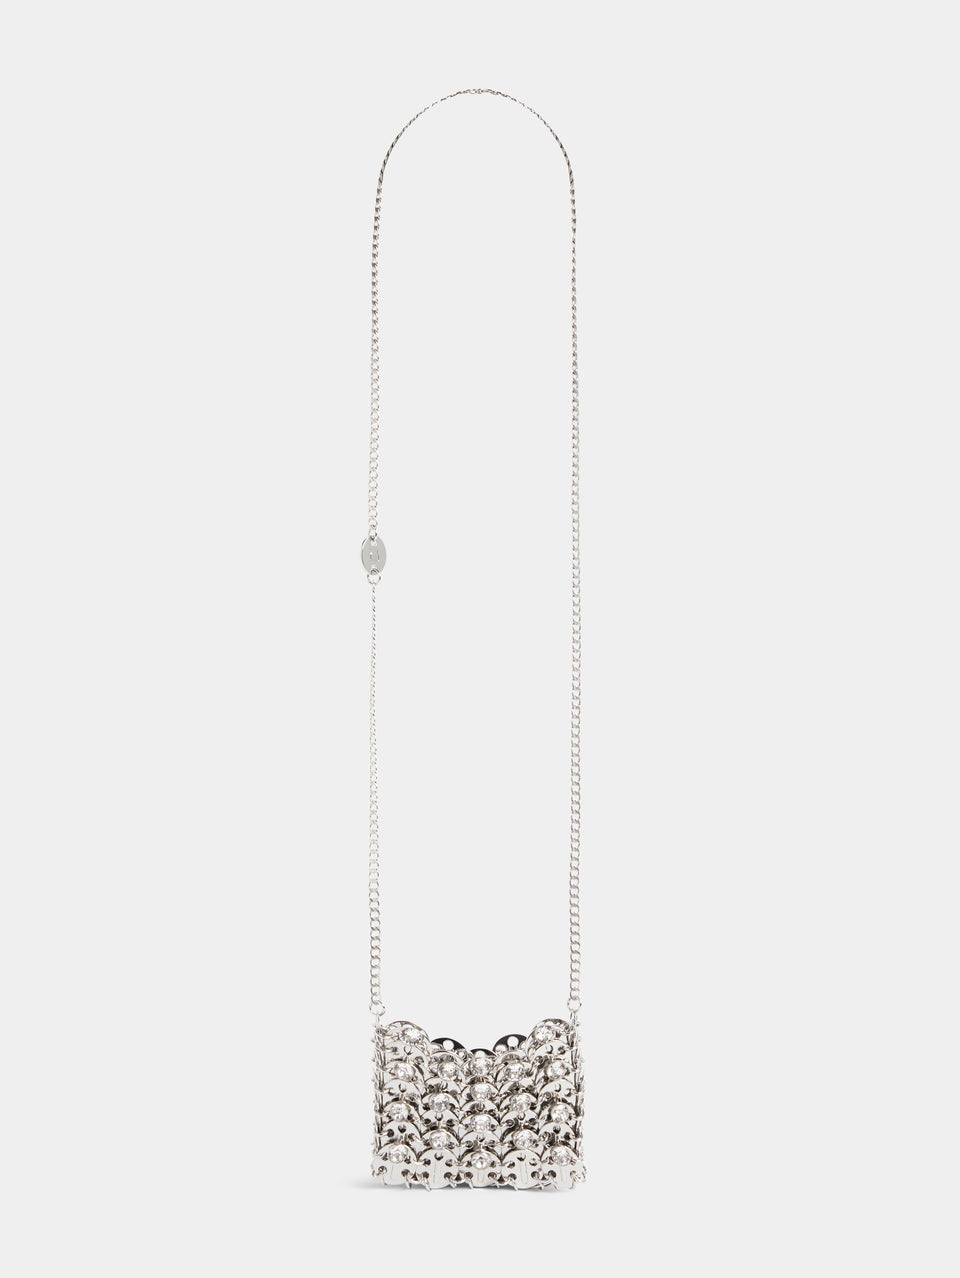 Sac Micro Argent et Strass 1969